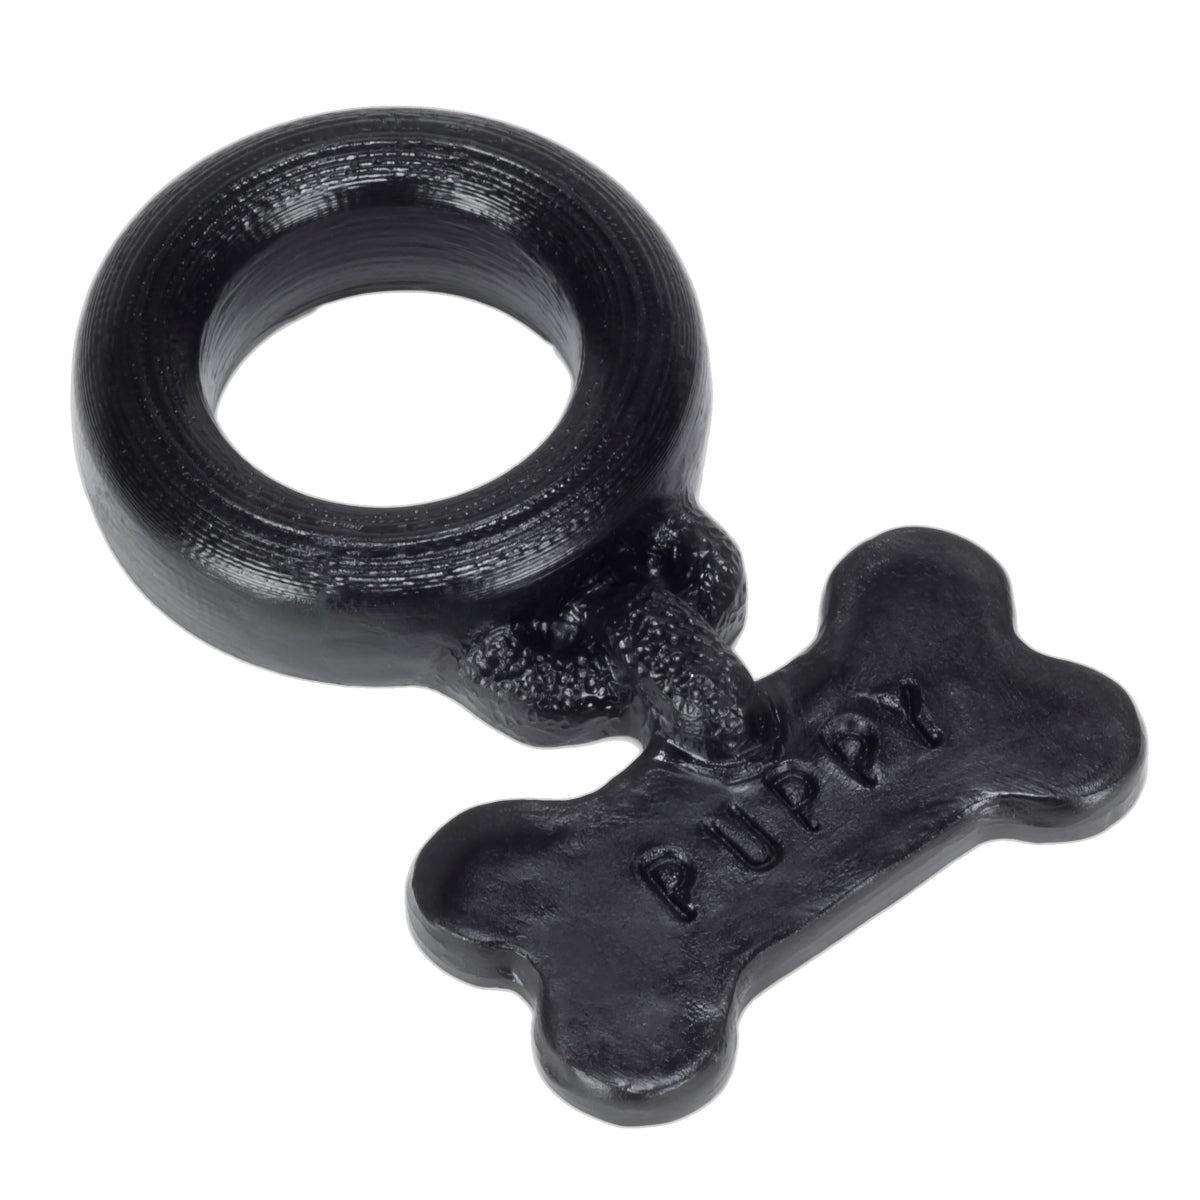 Prowler RED By Oxballs Puppy Cock Ring Black - Simply Pleasure